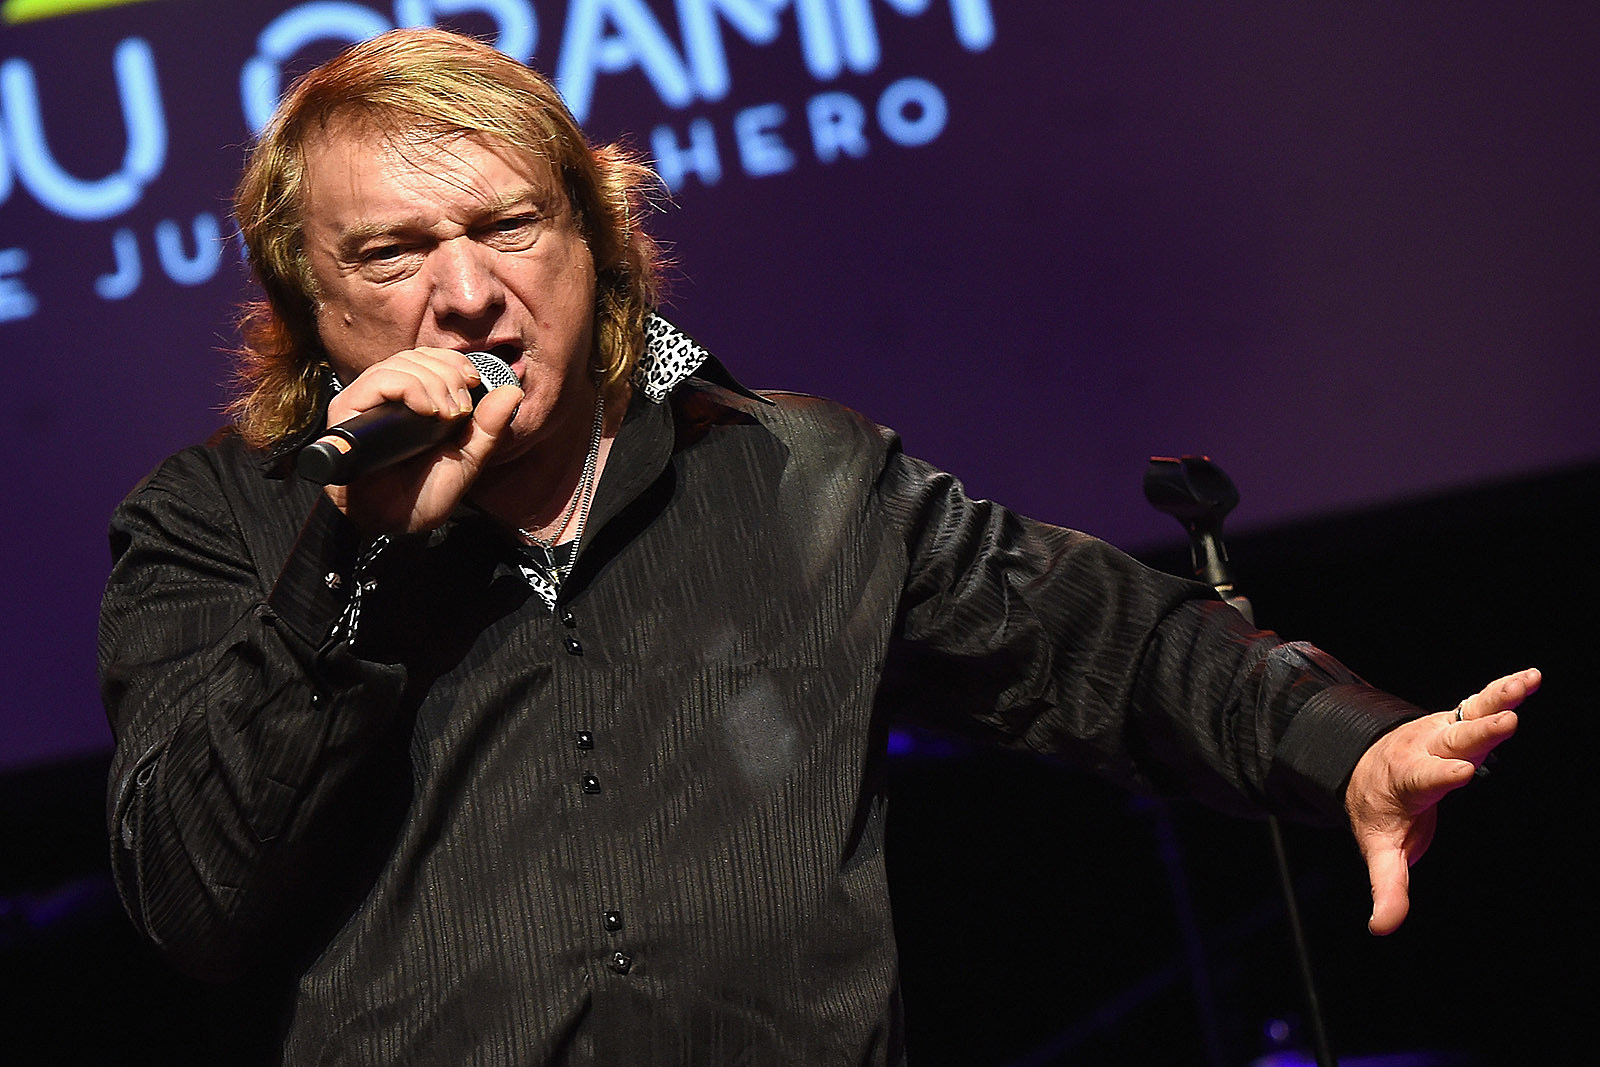 Autobiography On Foreigner’s Lou Gramm Is Announced